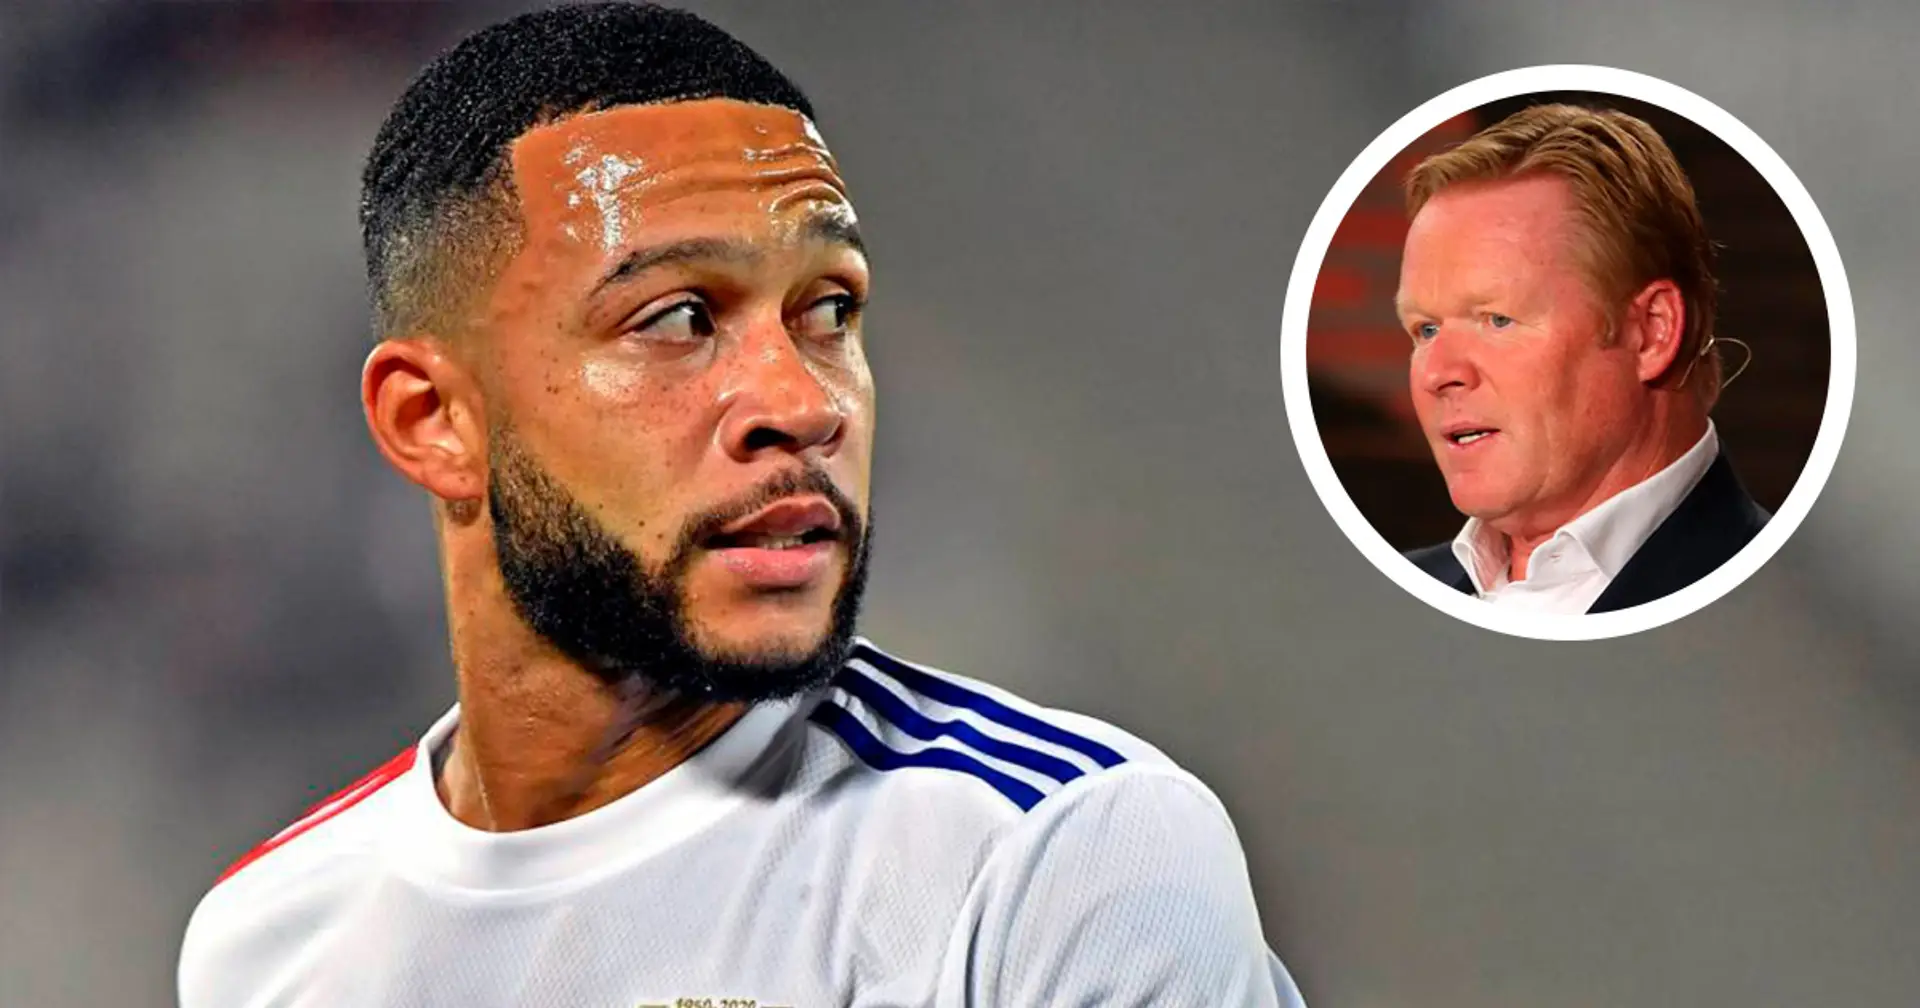 Koeman: 'We want Memphis and he wants to come too'